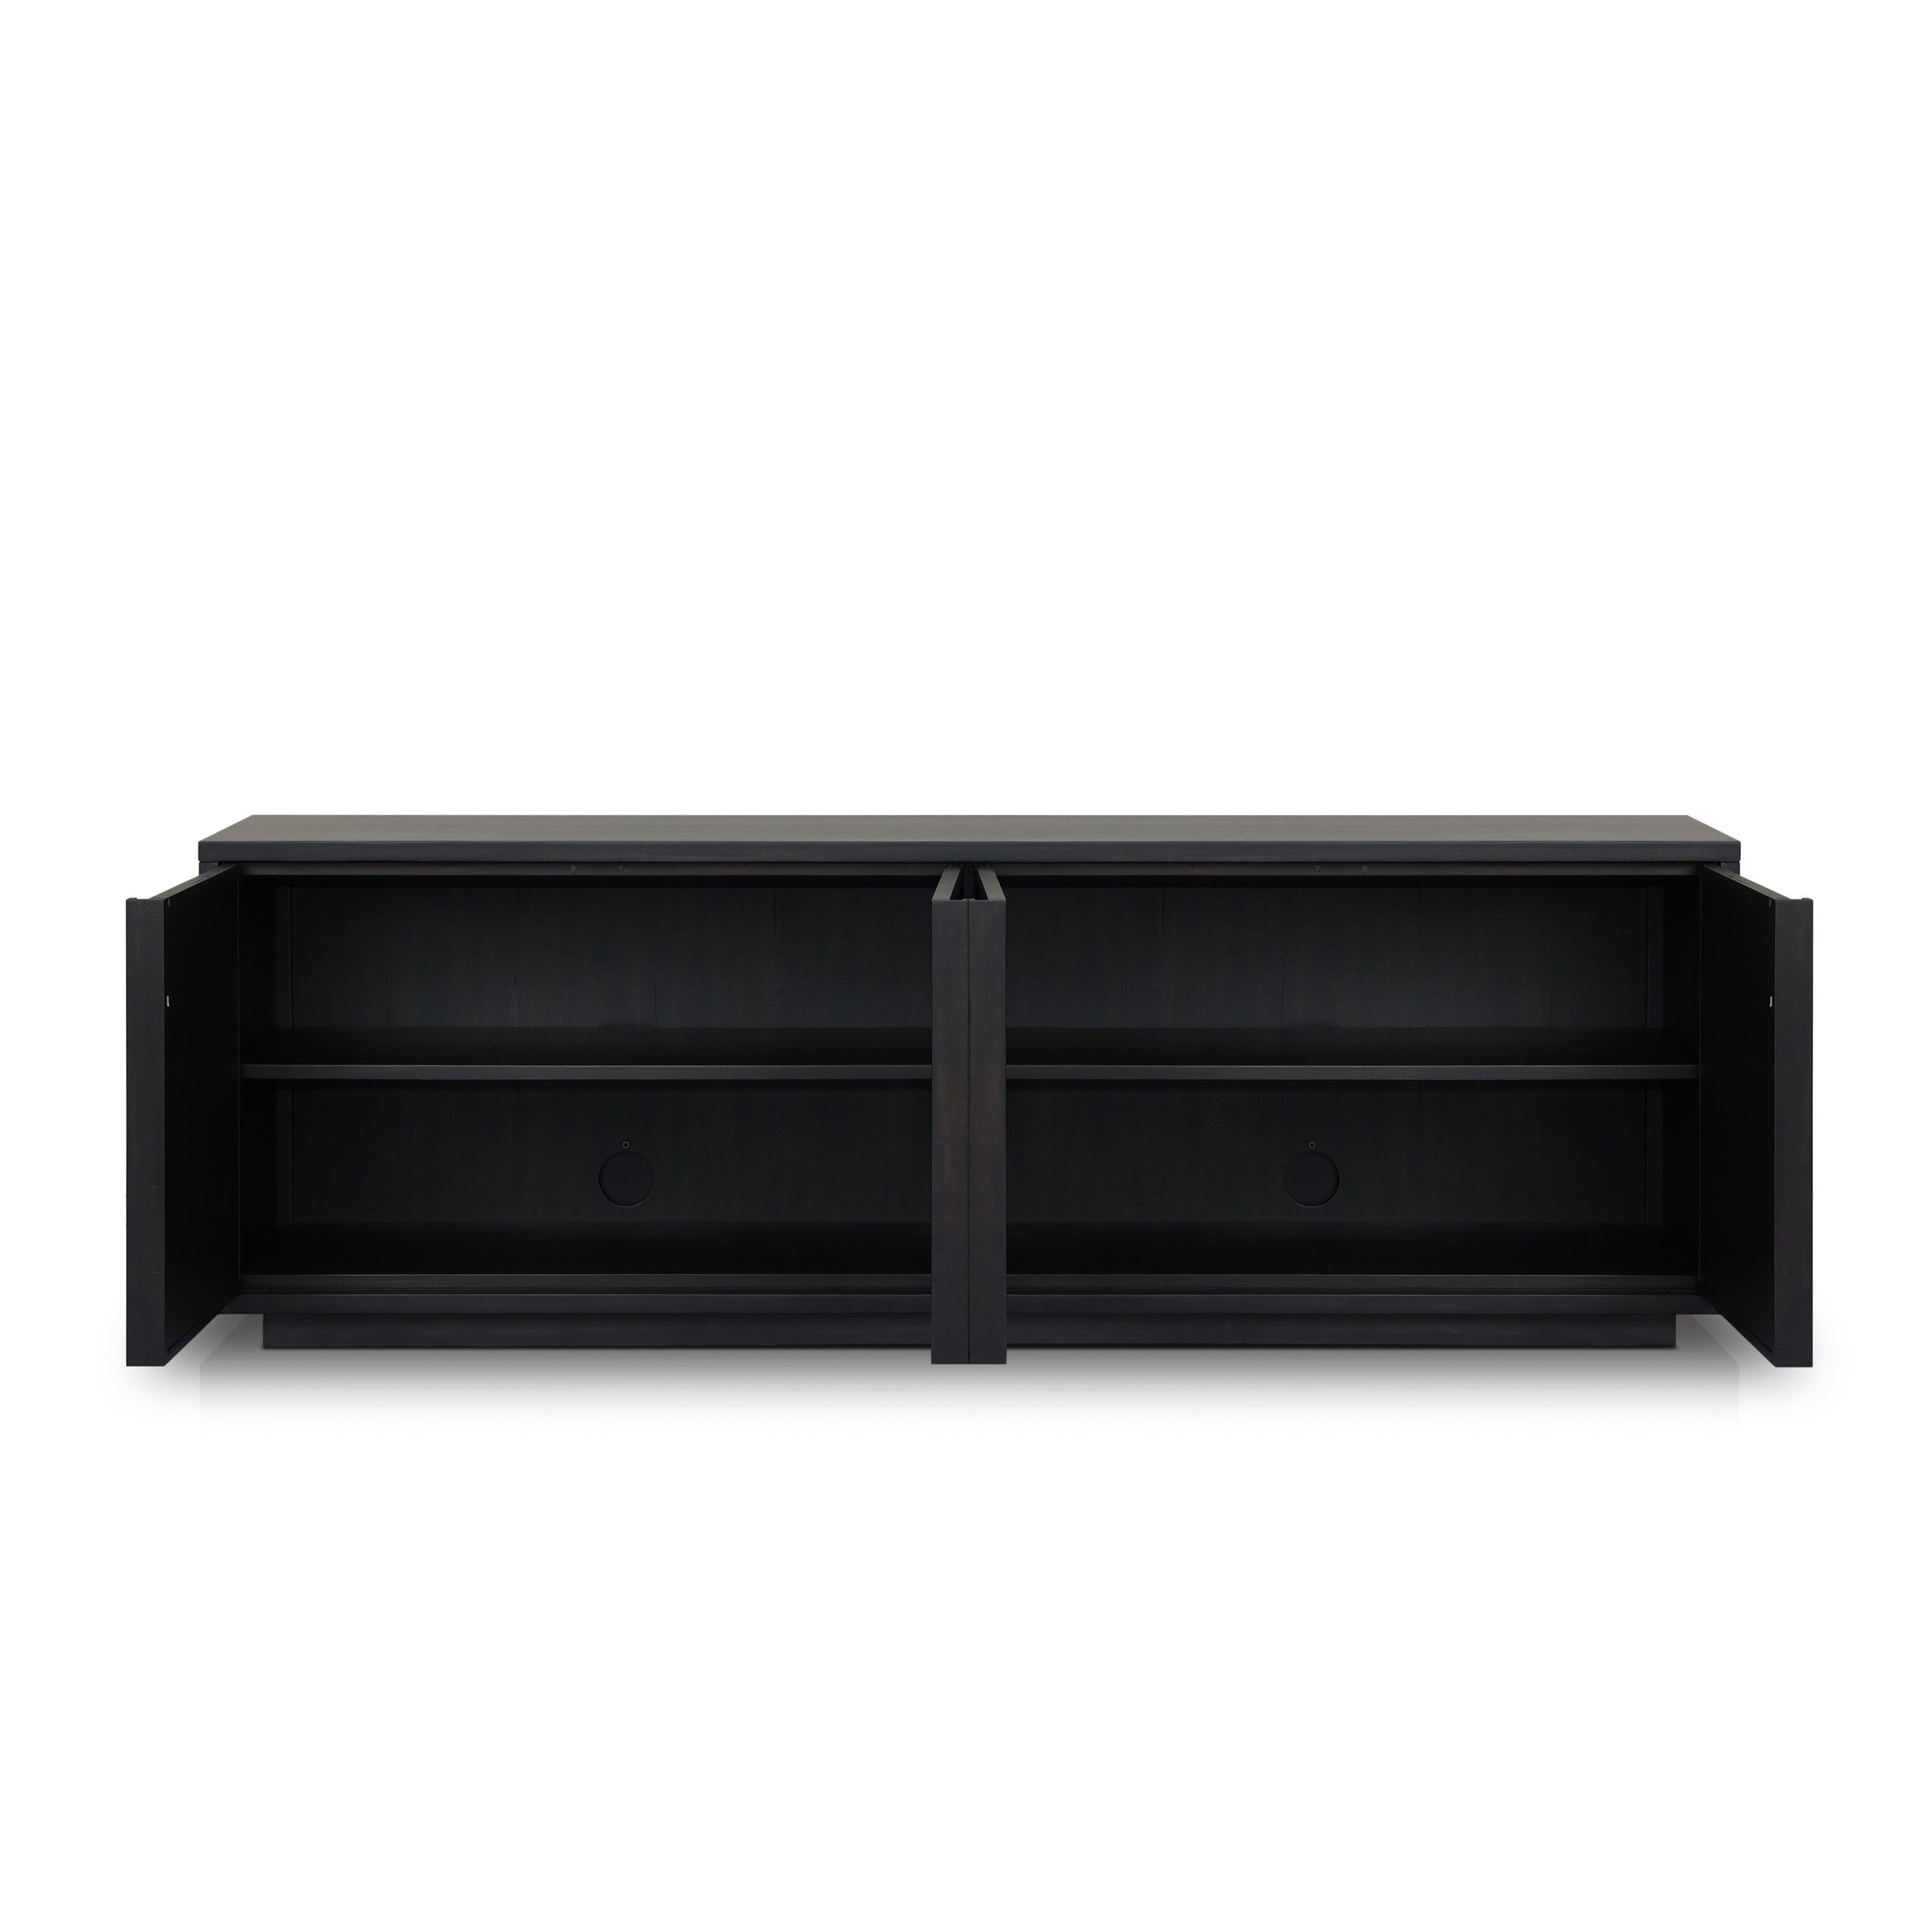 Nyland Media Console - Black with open doors